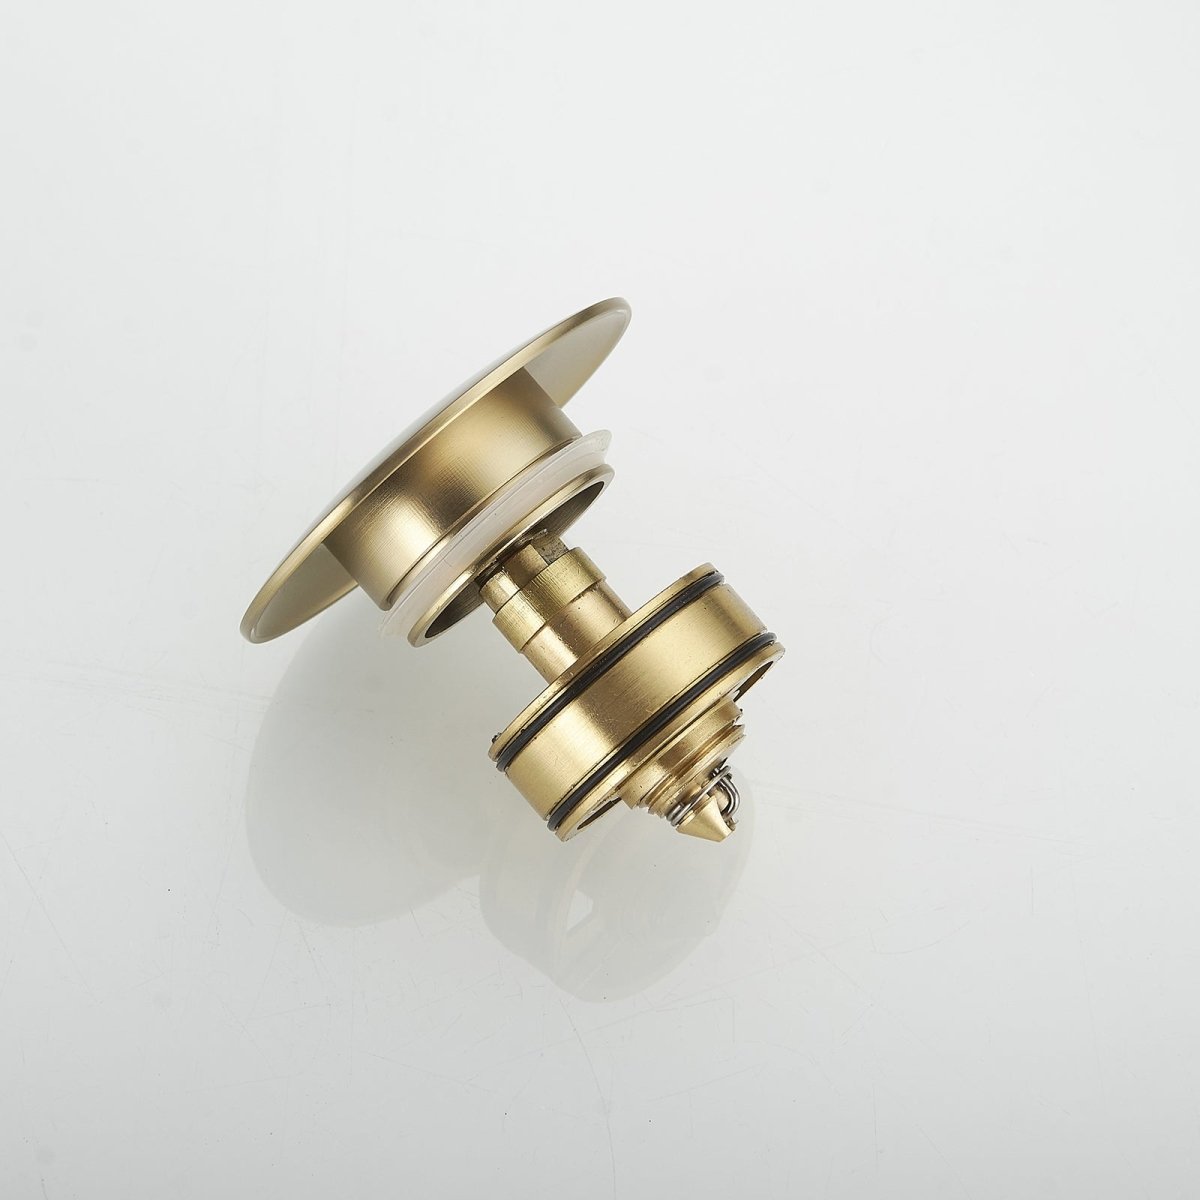 Bathroom Sink Drain Stopper Pop Up Drain with Strainer Brushed Gold - buyfaucet.com